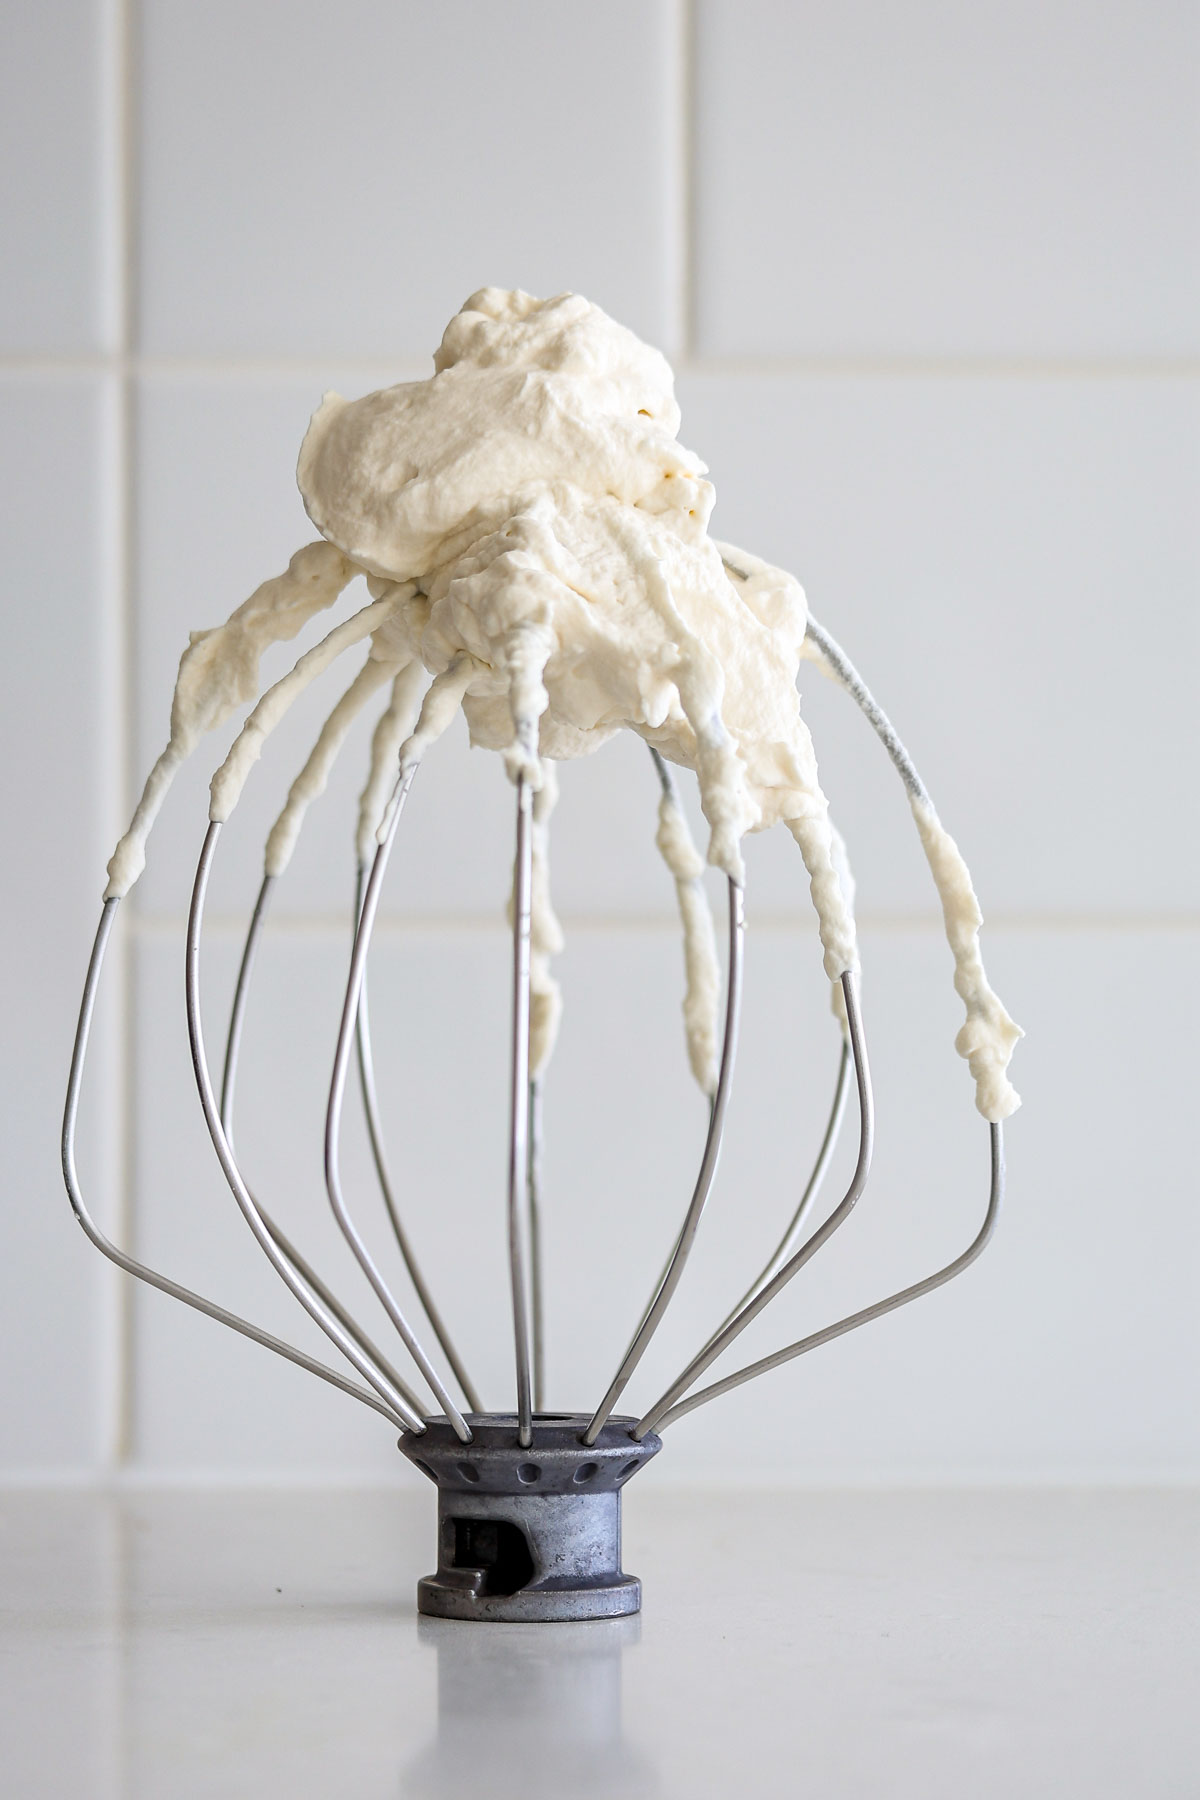 Kitchen Aid whisk attachment with Earl Grey whipped cream.